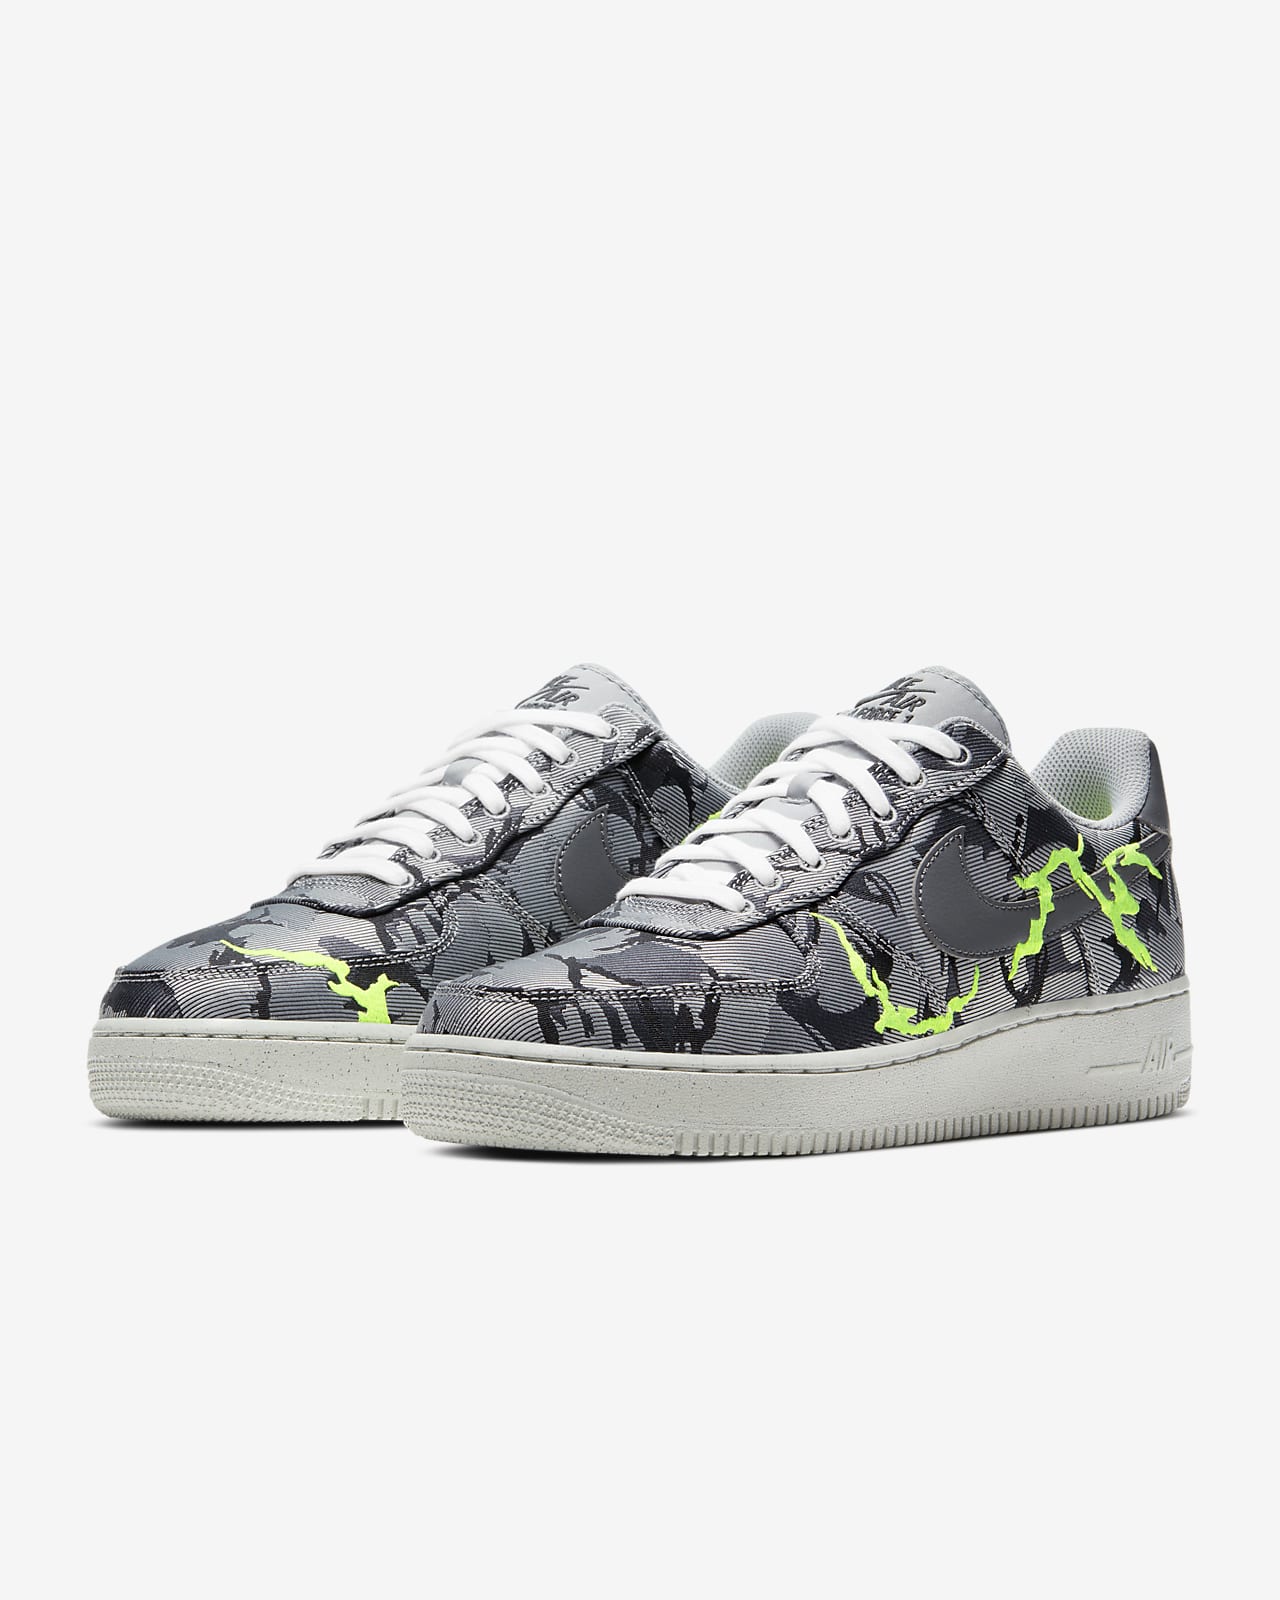 air force 1 under 60